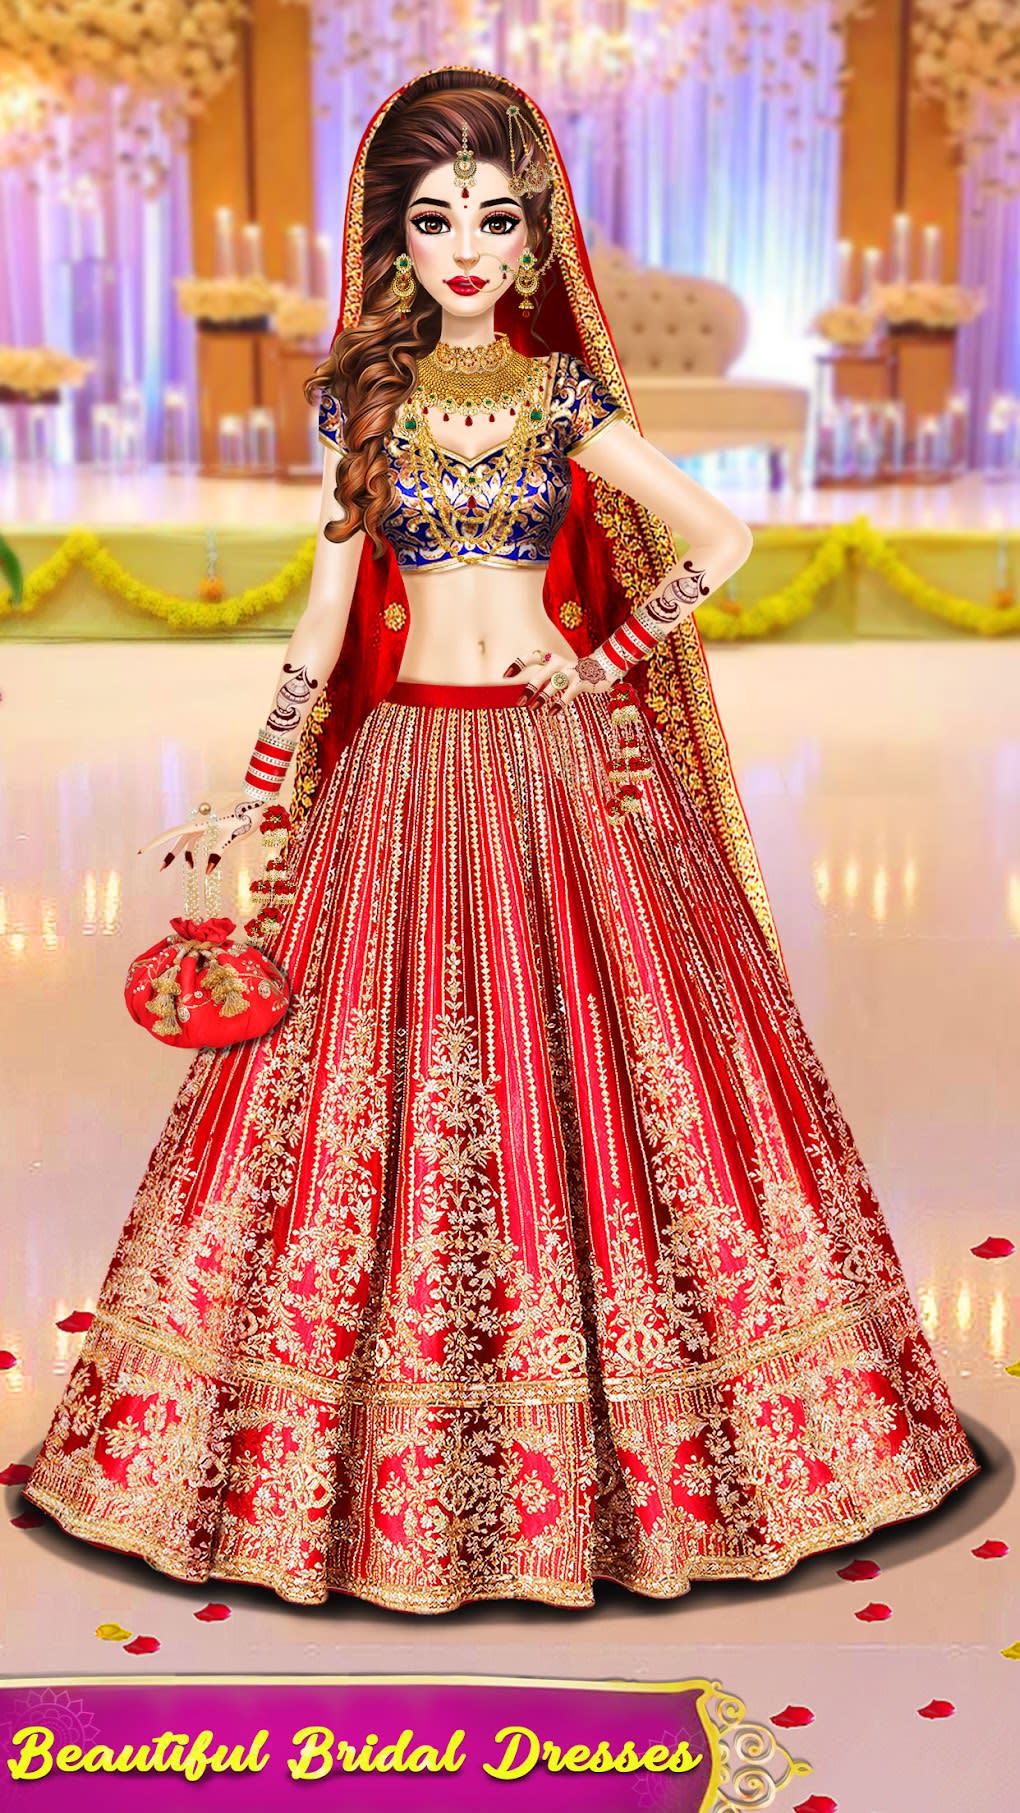 Indian Wedding Dress Up Game APK 3.3 for Android – Download Indian Wedding  Dress Up Game XAPK (APK Bundle) Latest Version from APKFab.com